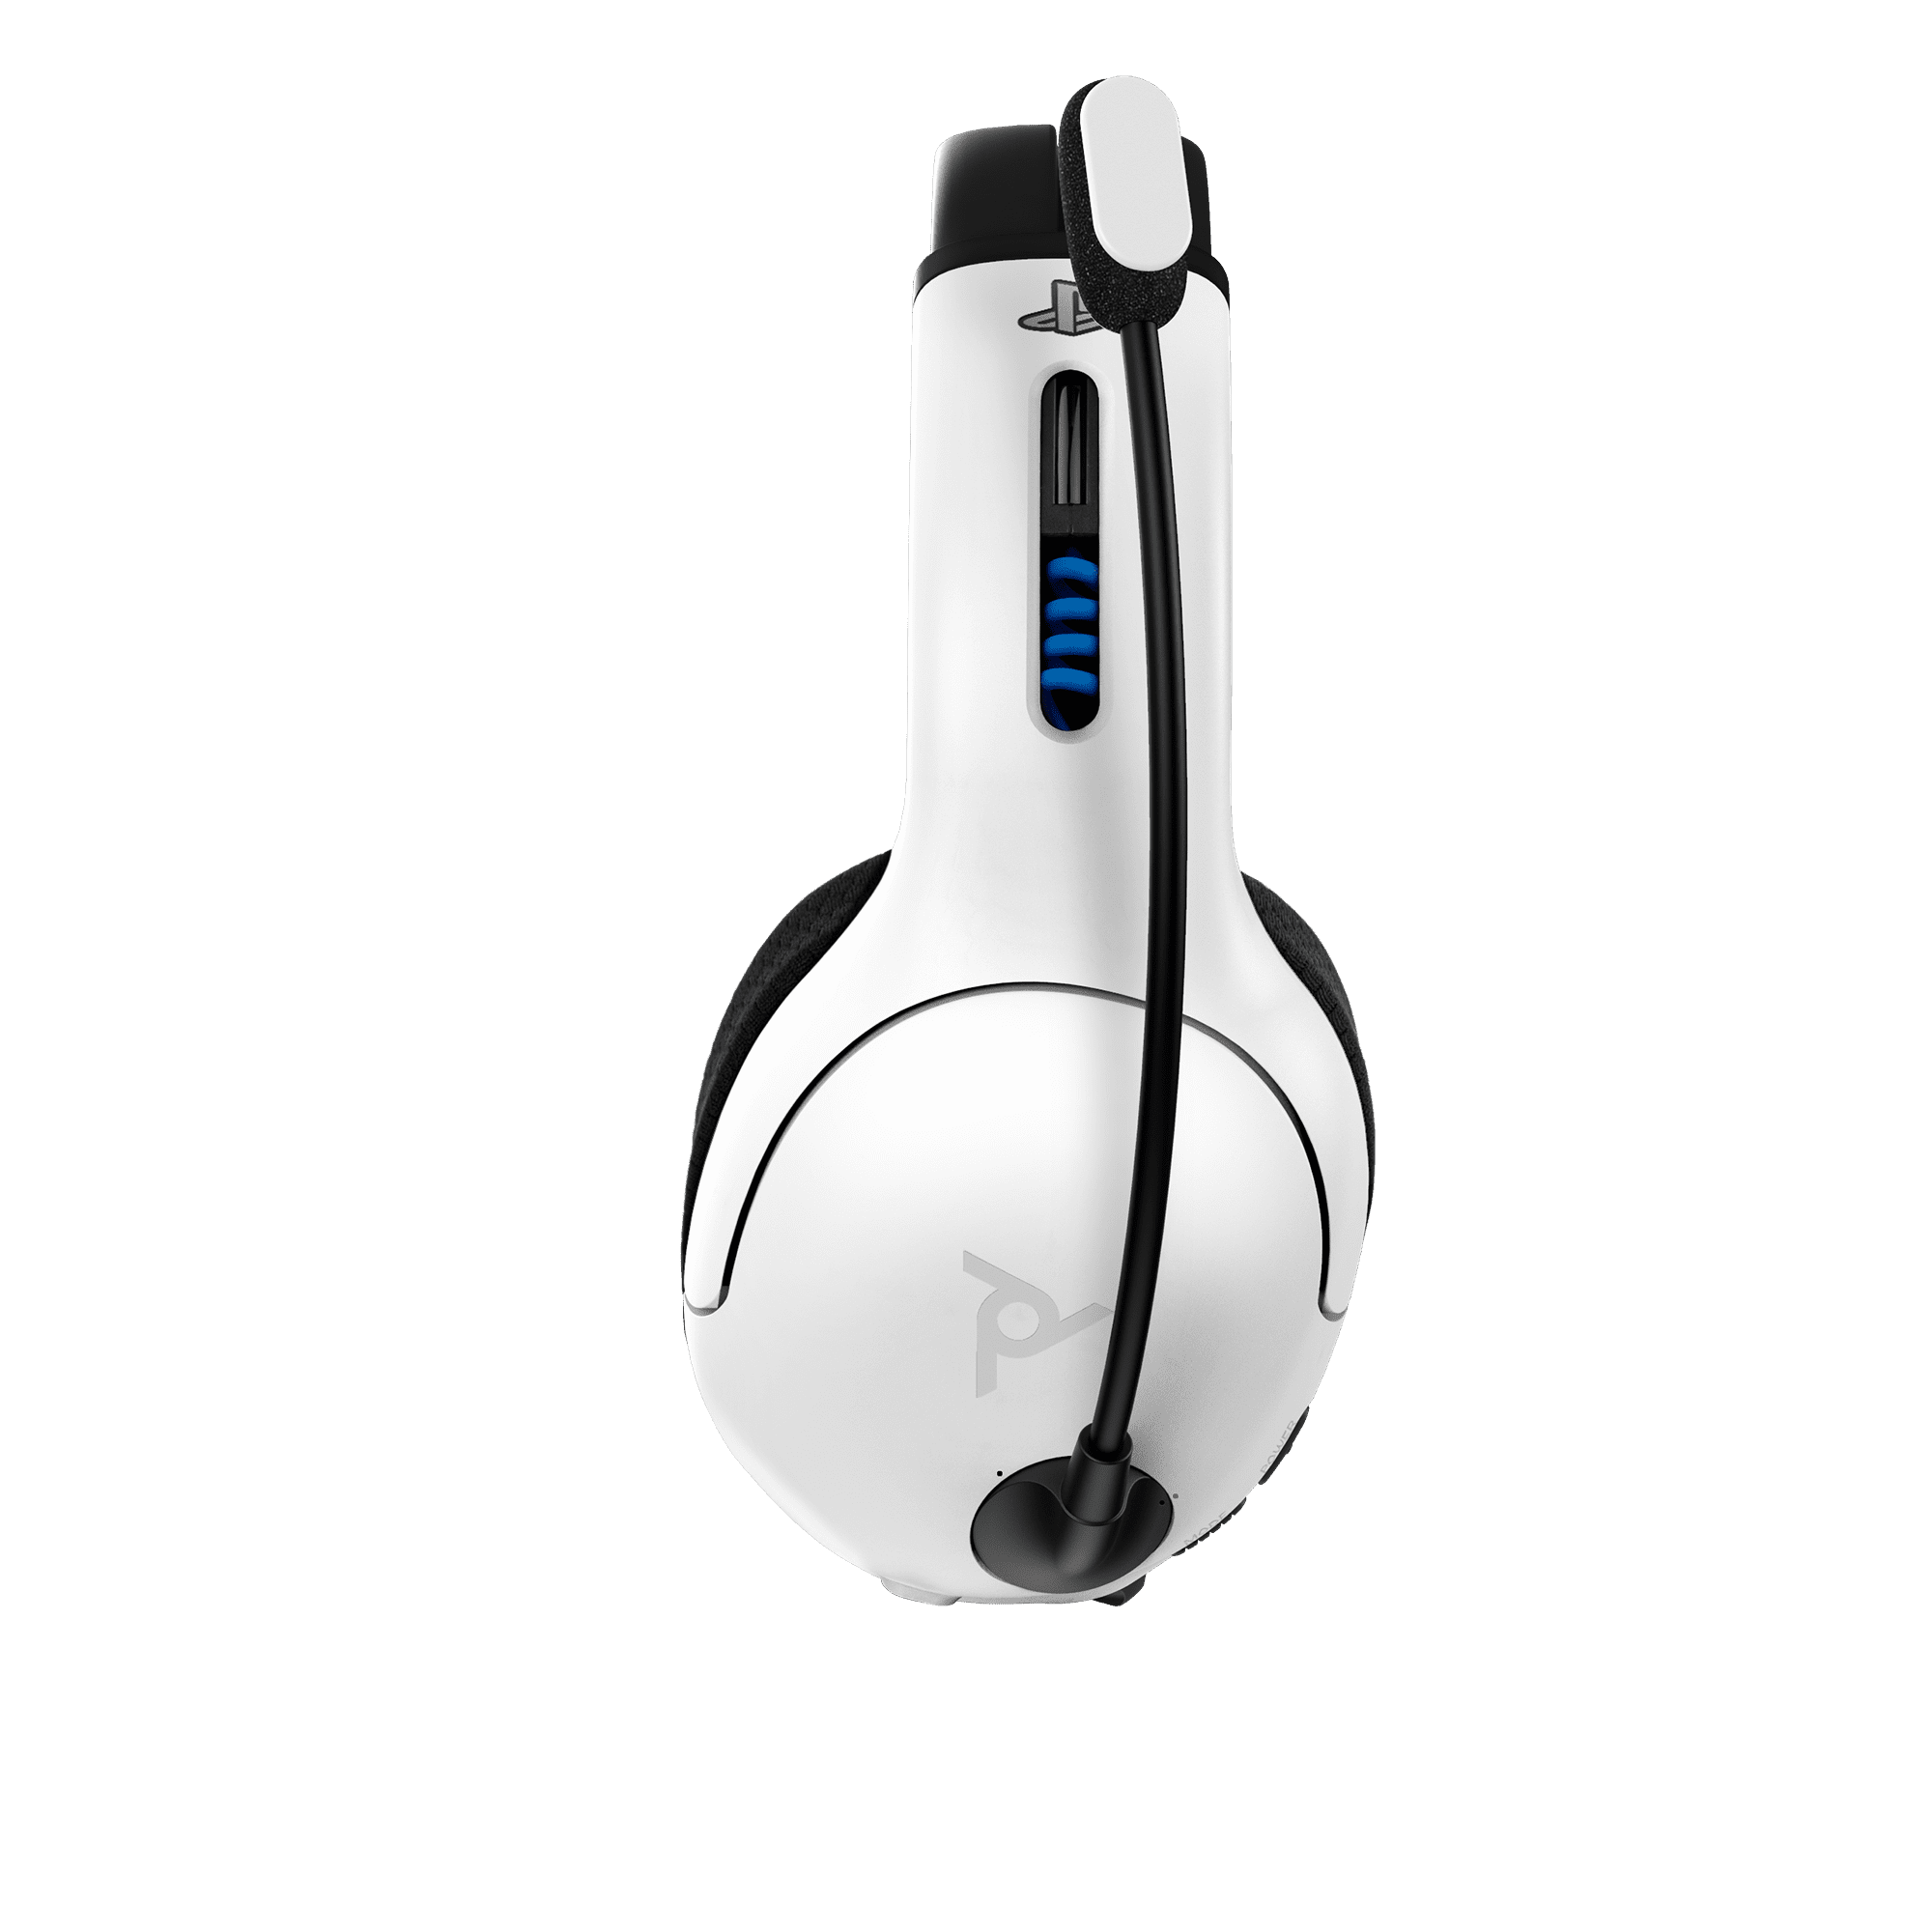 PDP LVL 50 Wireless Stereo Headset - XBOX ONE —